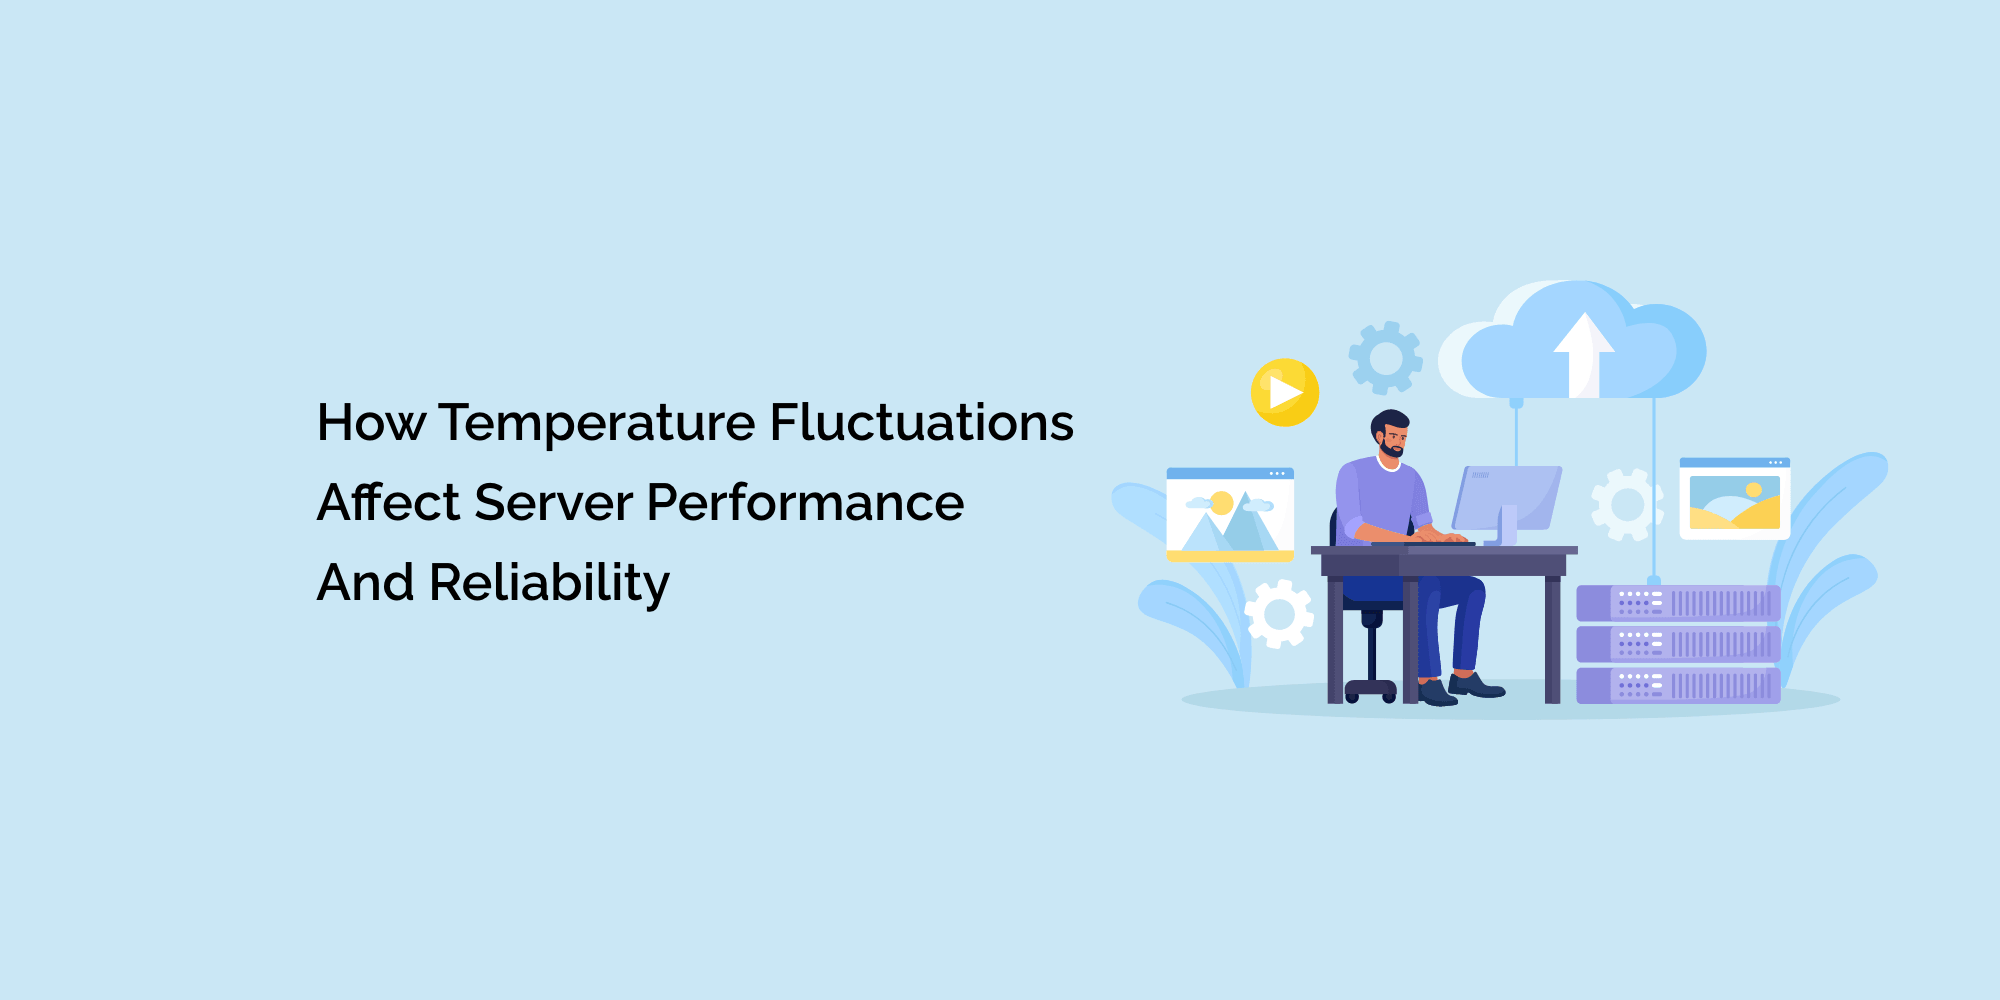 How Temperature Fluctuations Affect Server Performance and Reliability